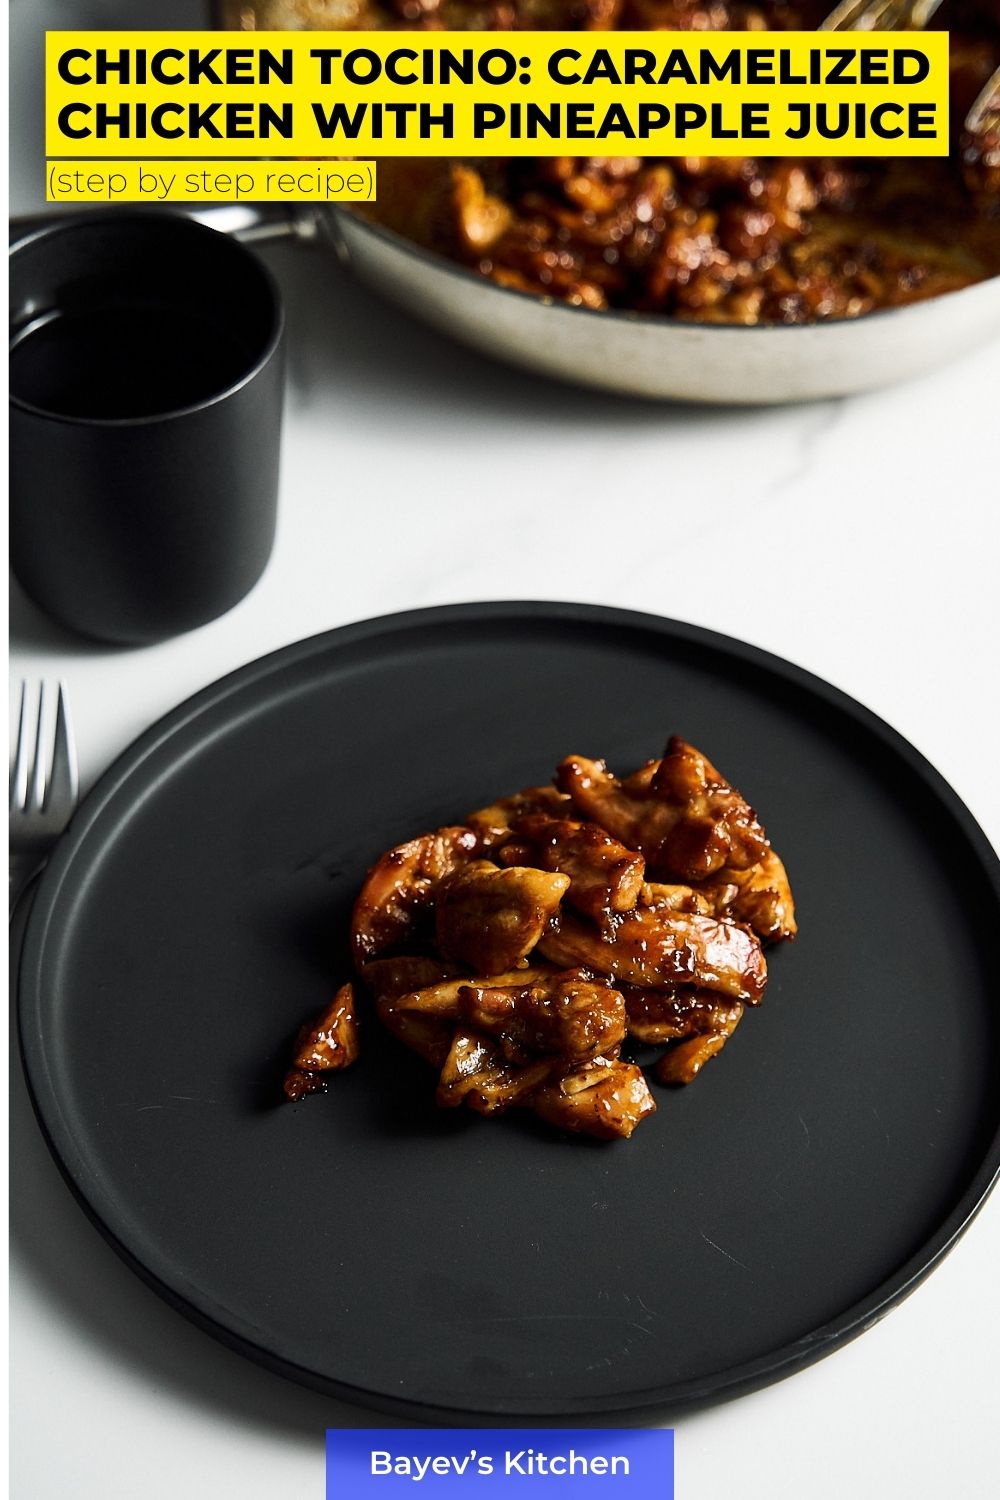 Chicken Tocino: Caramelized Chicken with Pineapple Juice by bayevskitchen.com